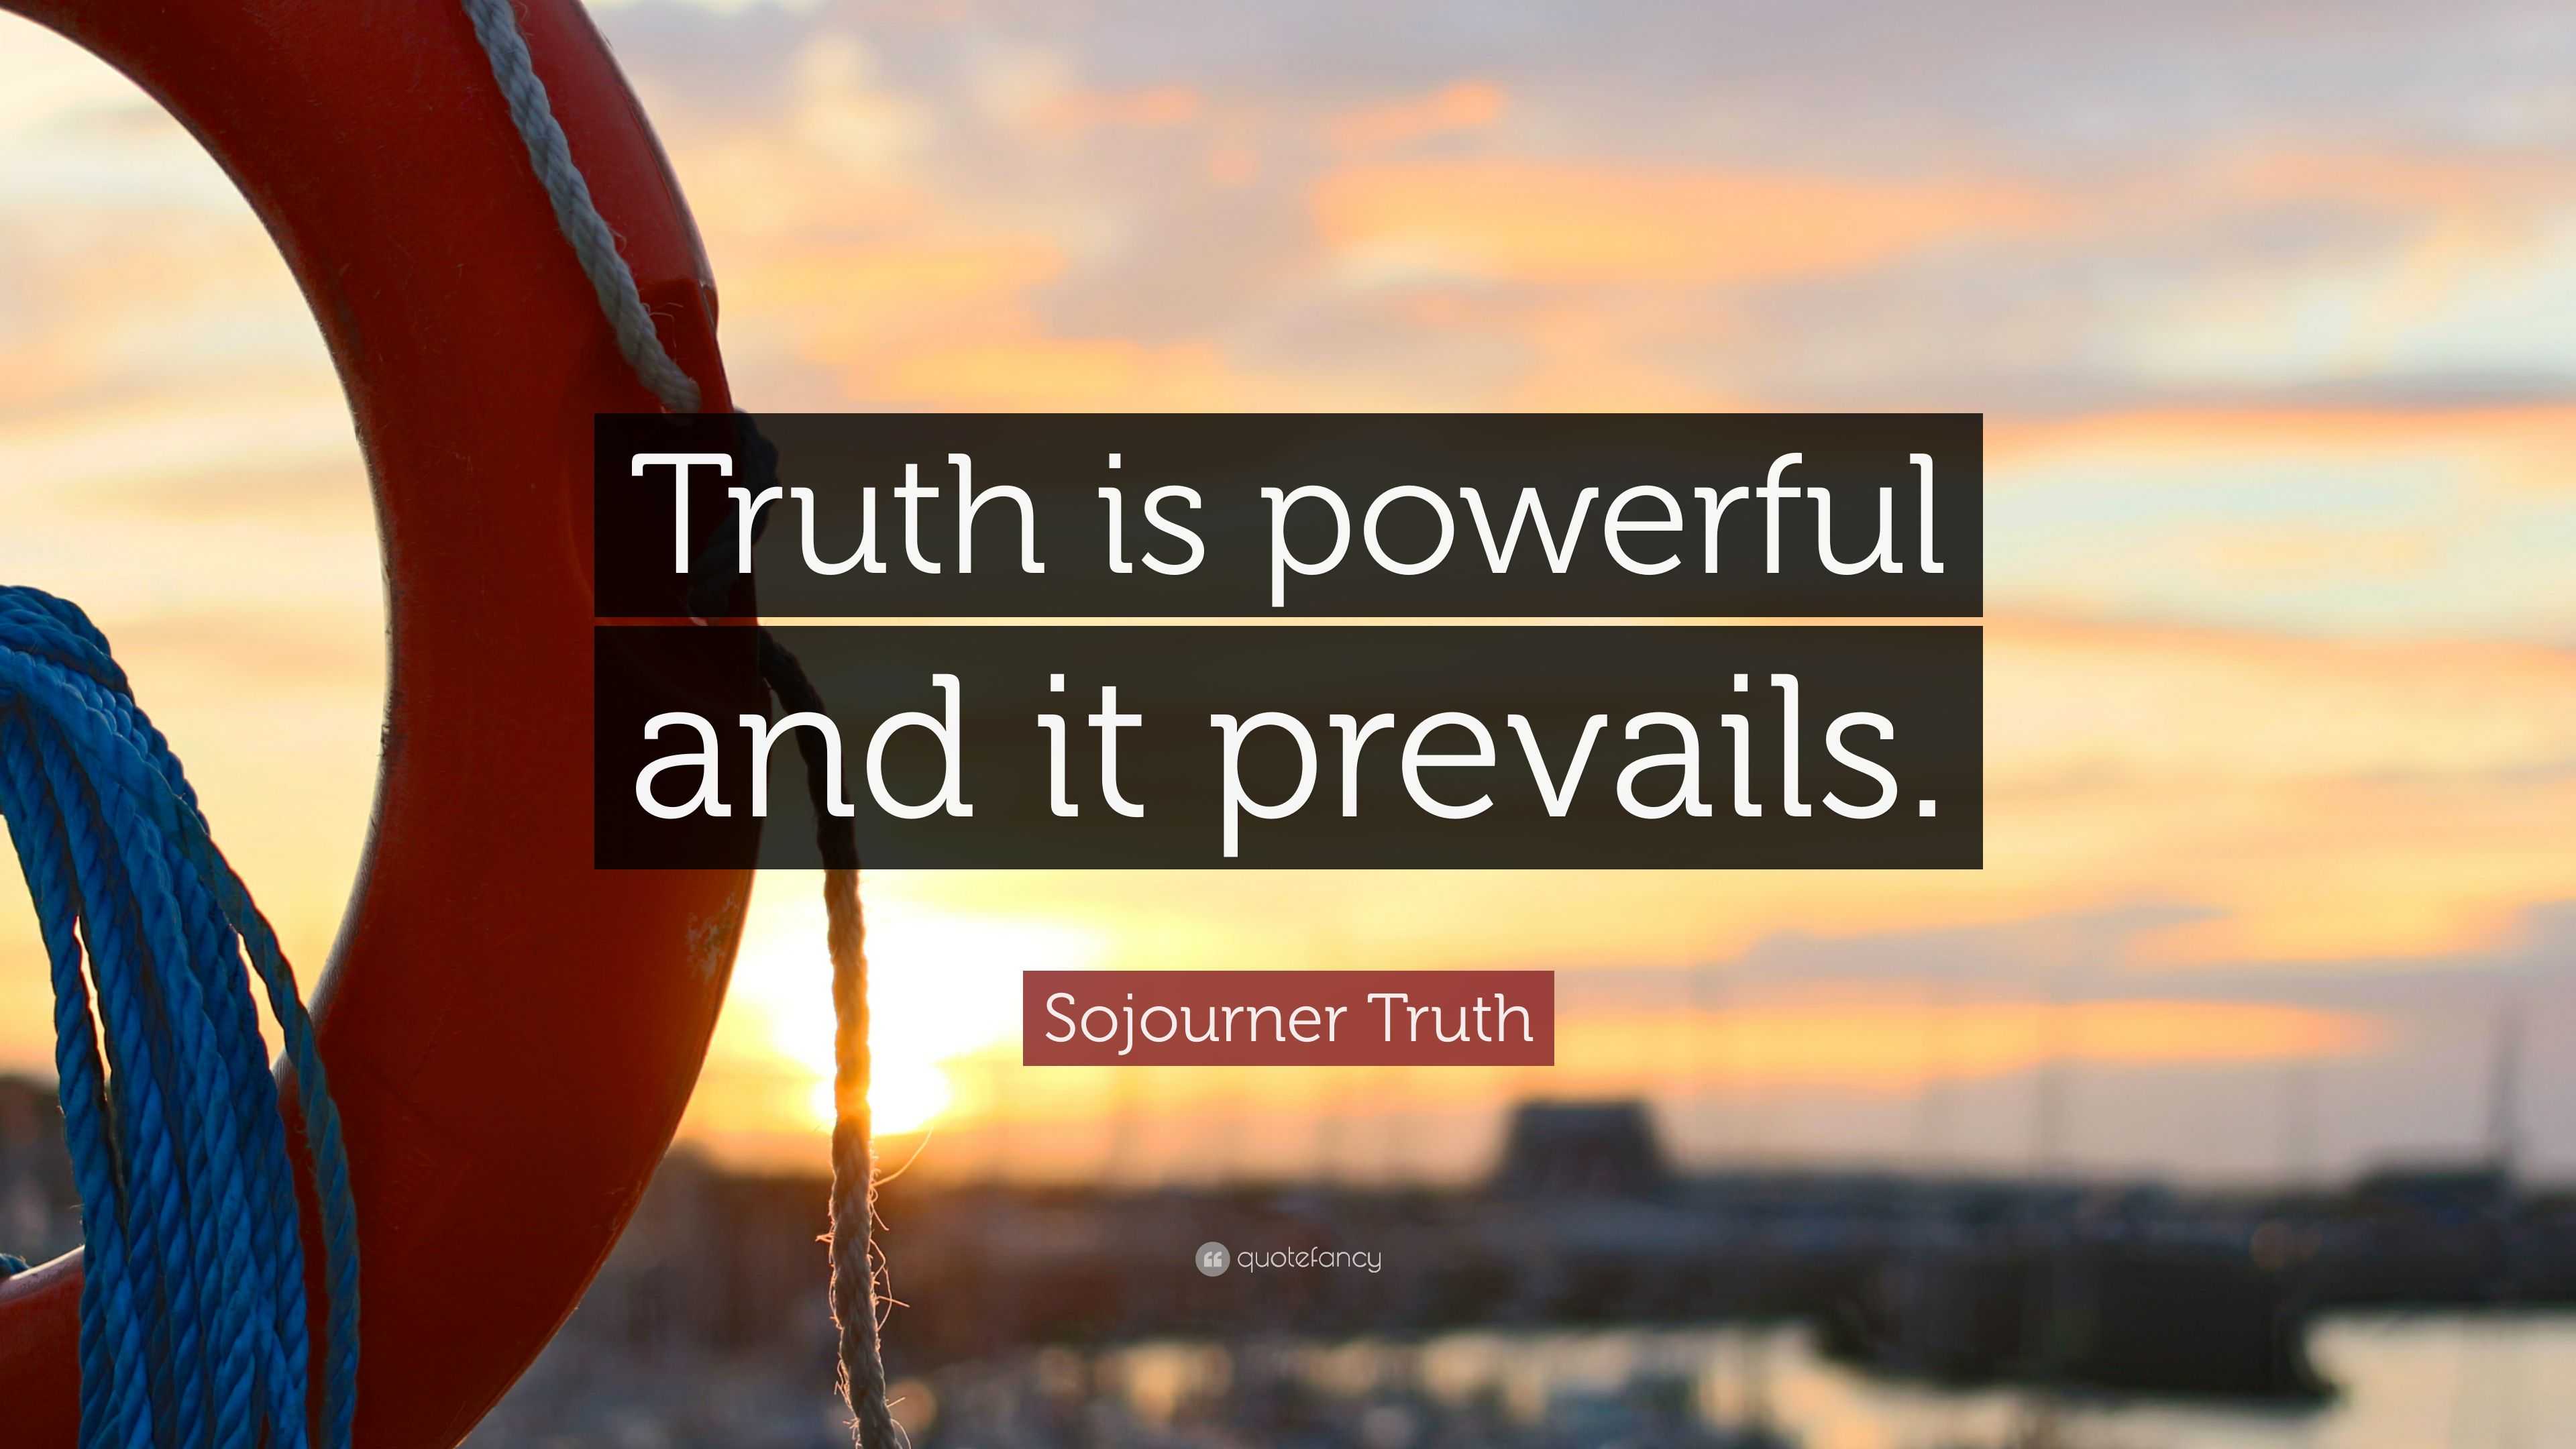 Sojourner Truth Quote: "Truth is powerful and it prevails ...